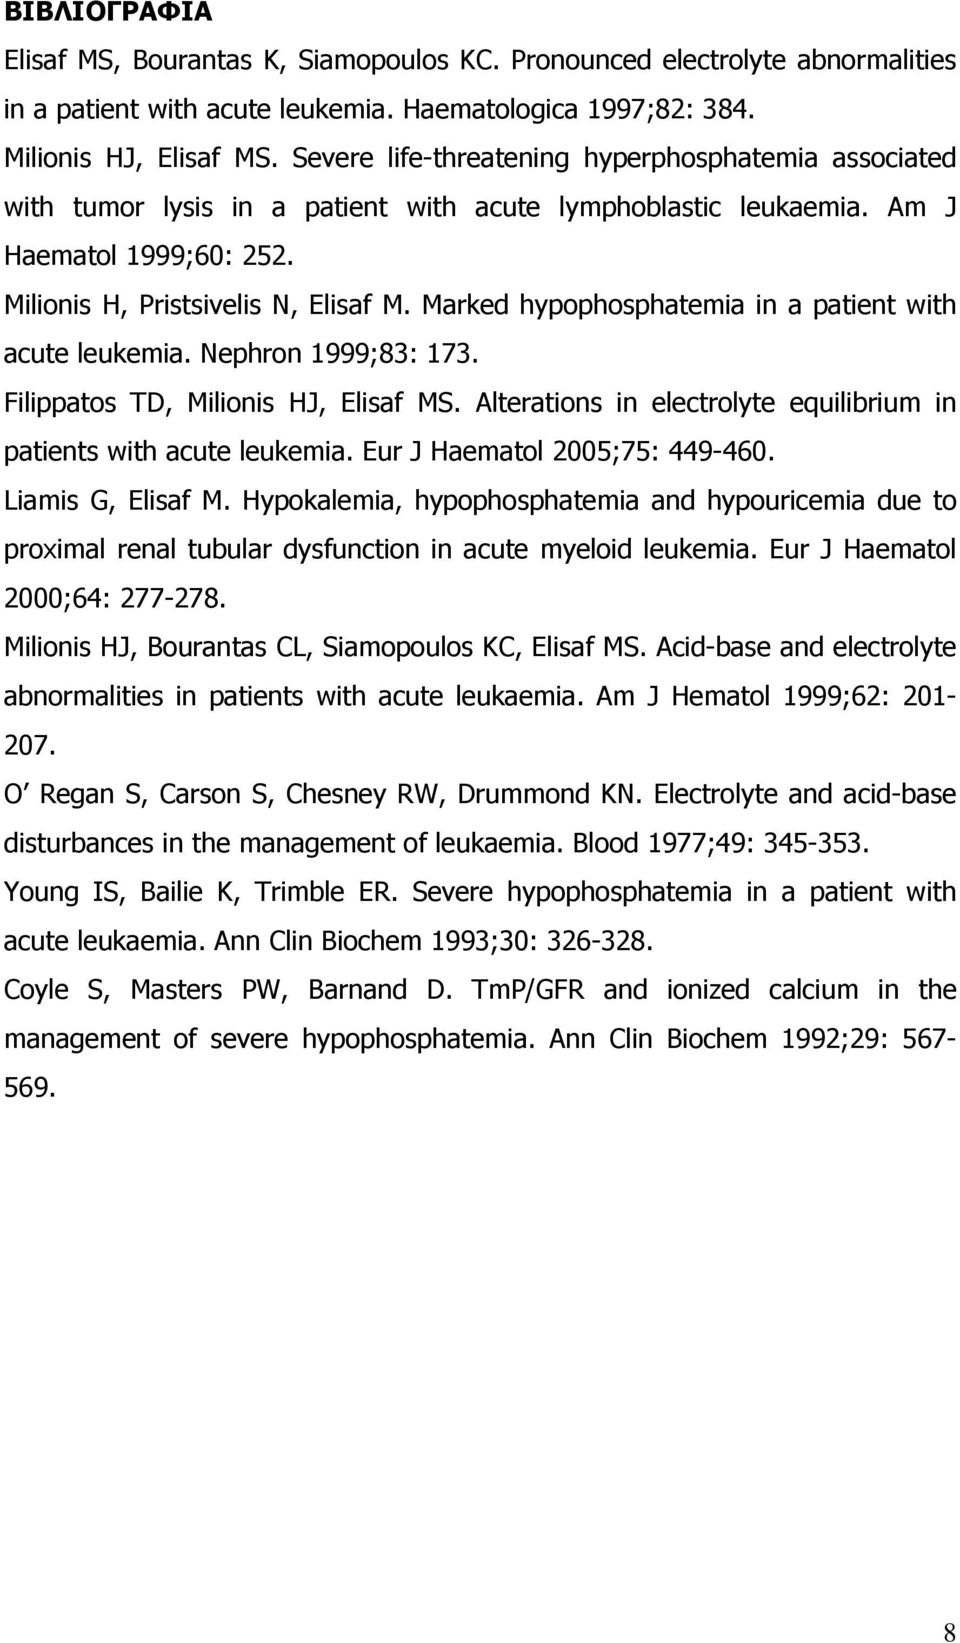 Marked hypophosphatemia in a patient with acute leukemia. Nephron 1999;83: 173. Filippatos TD, Milionis HJ, Elisaf MS. Alterations in electrolyte equilibrium in patients with acute leukemia.